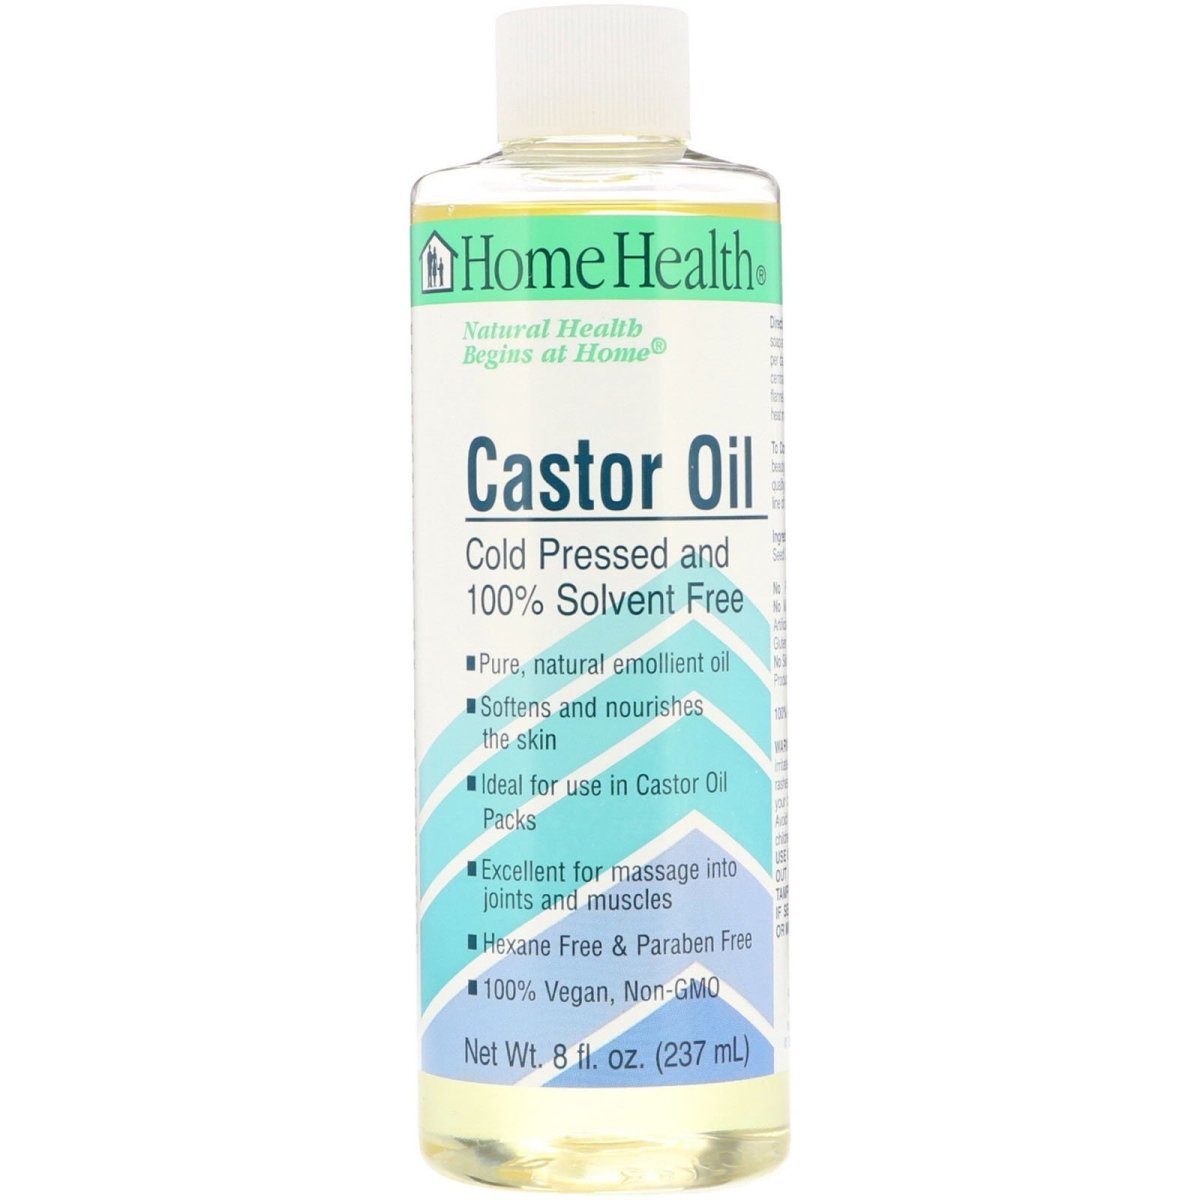 Castor Oil - Cold Pressed and 100% Solvent Free 8 Oz